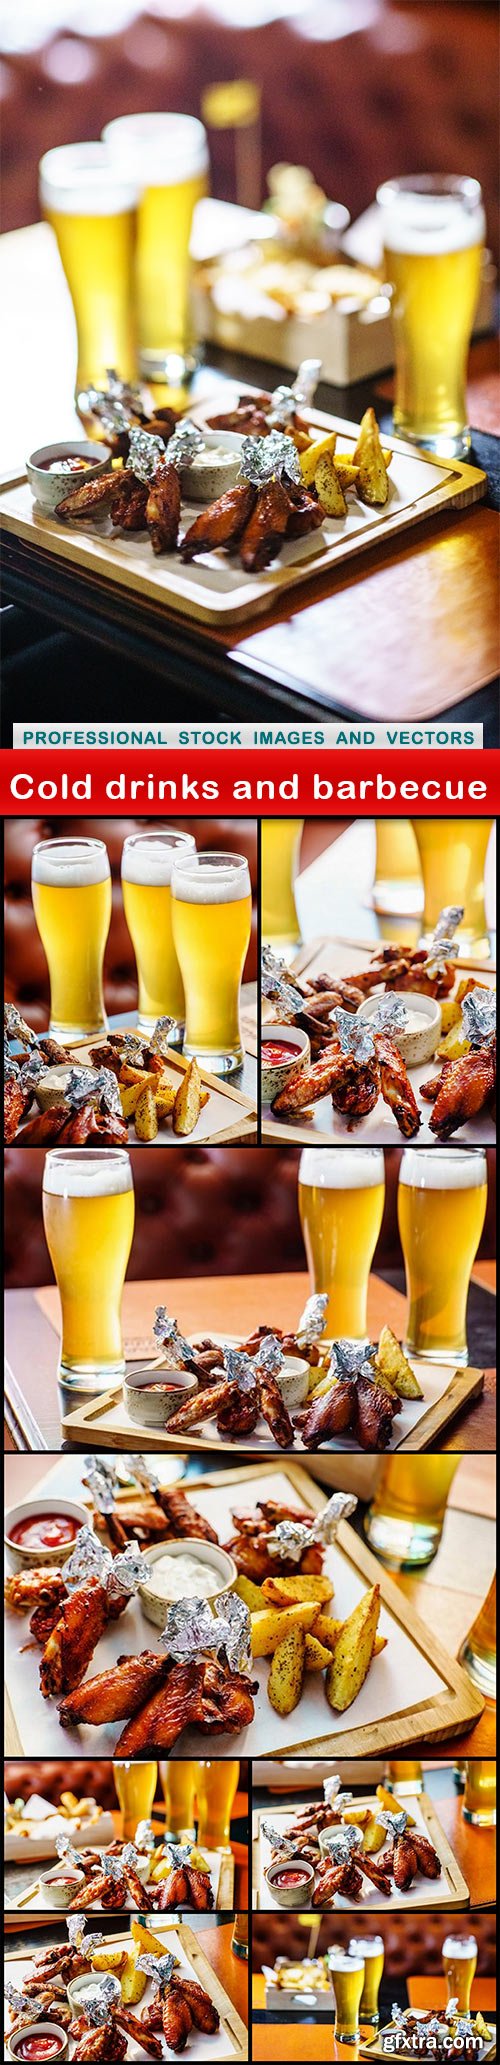 Cold drinks and barbecue - 9 UHQ JPEG